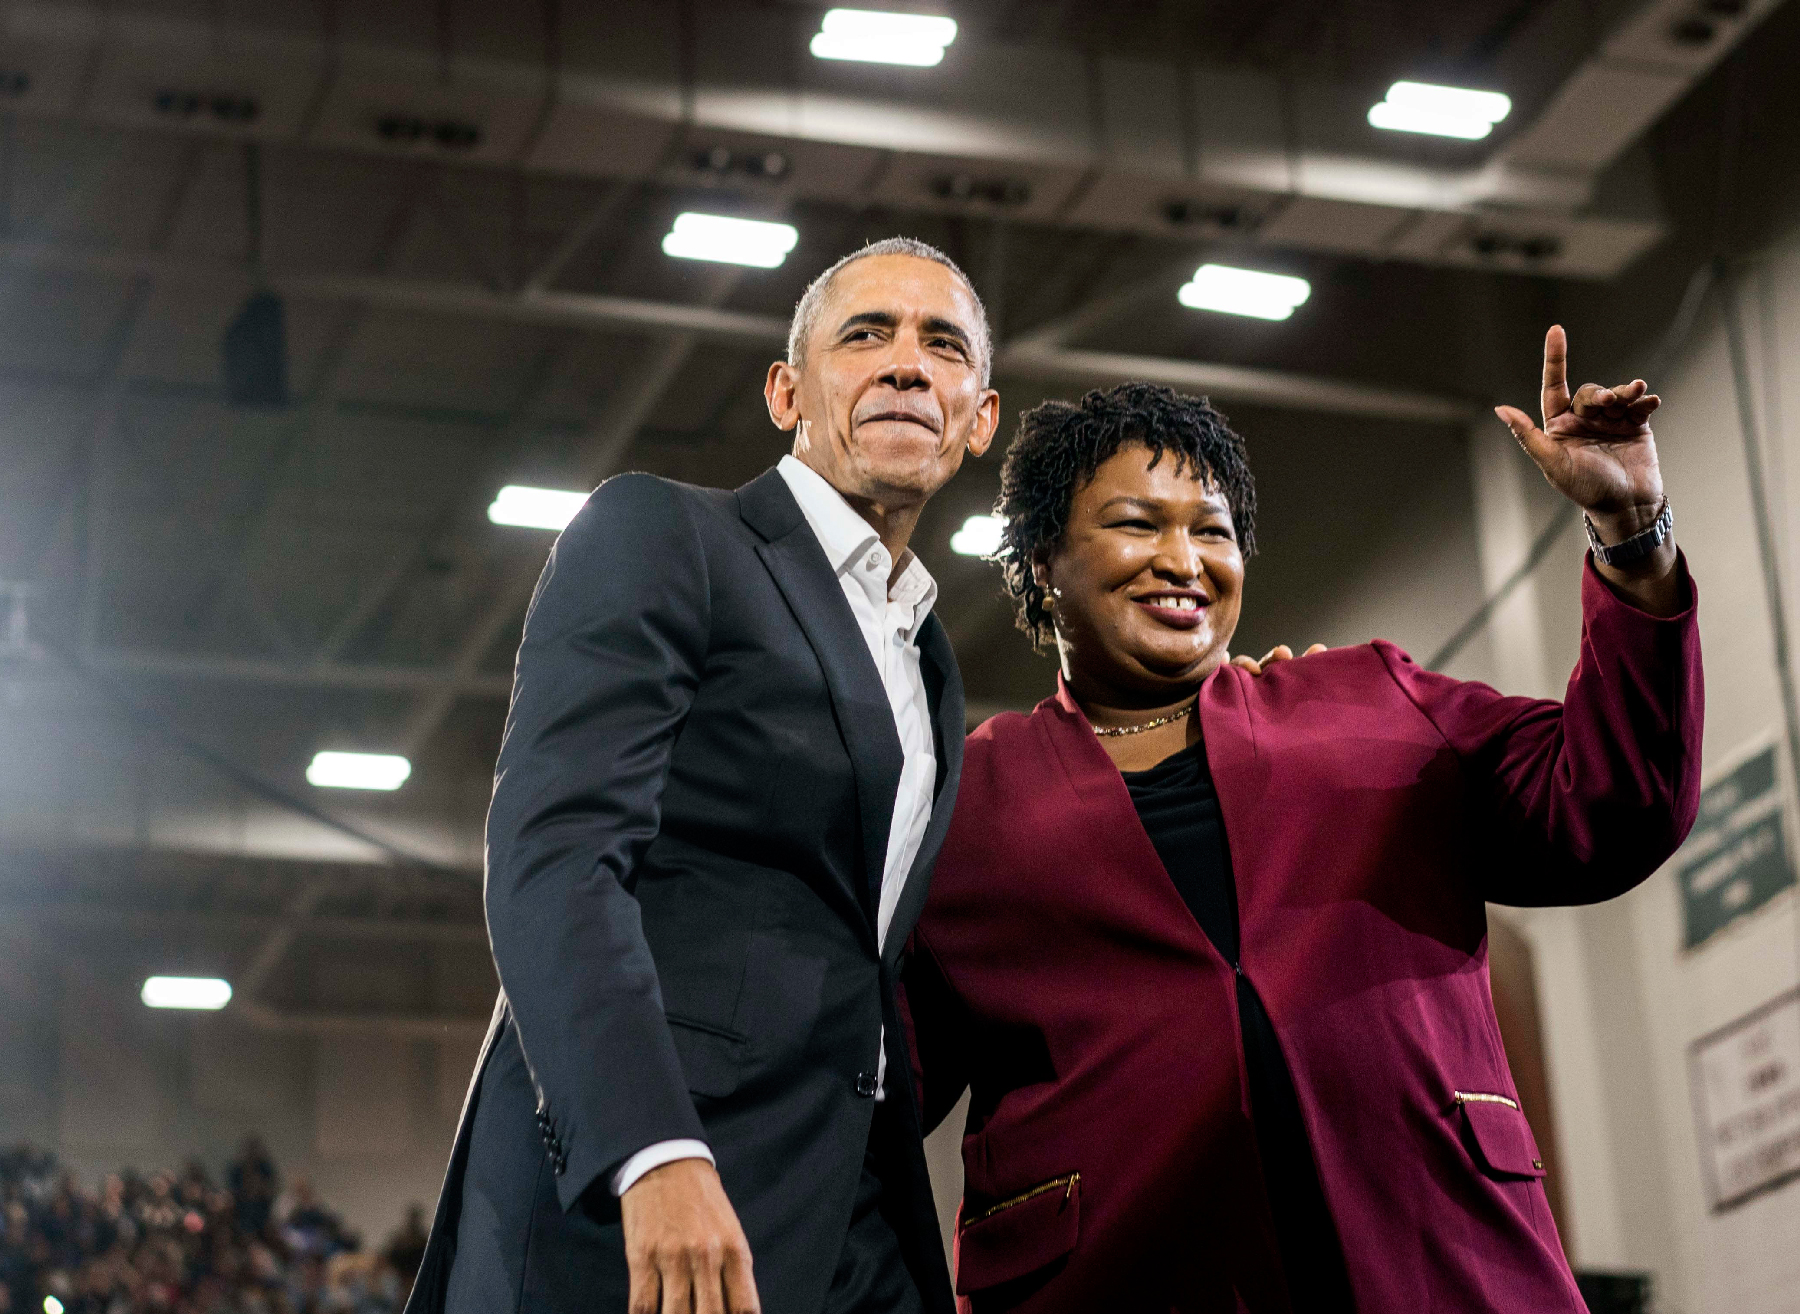 Who is Stacey Abrams